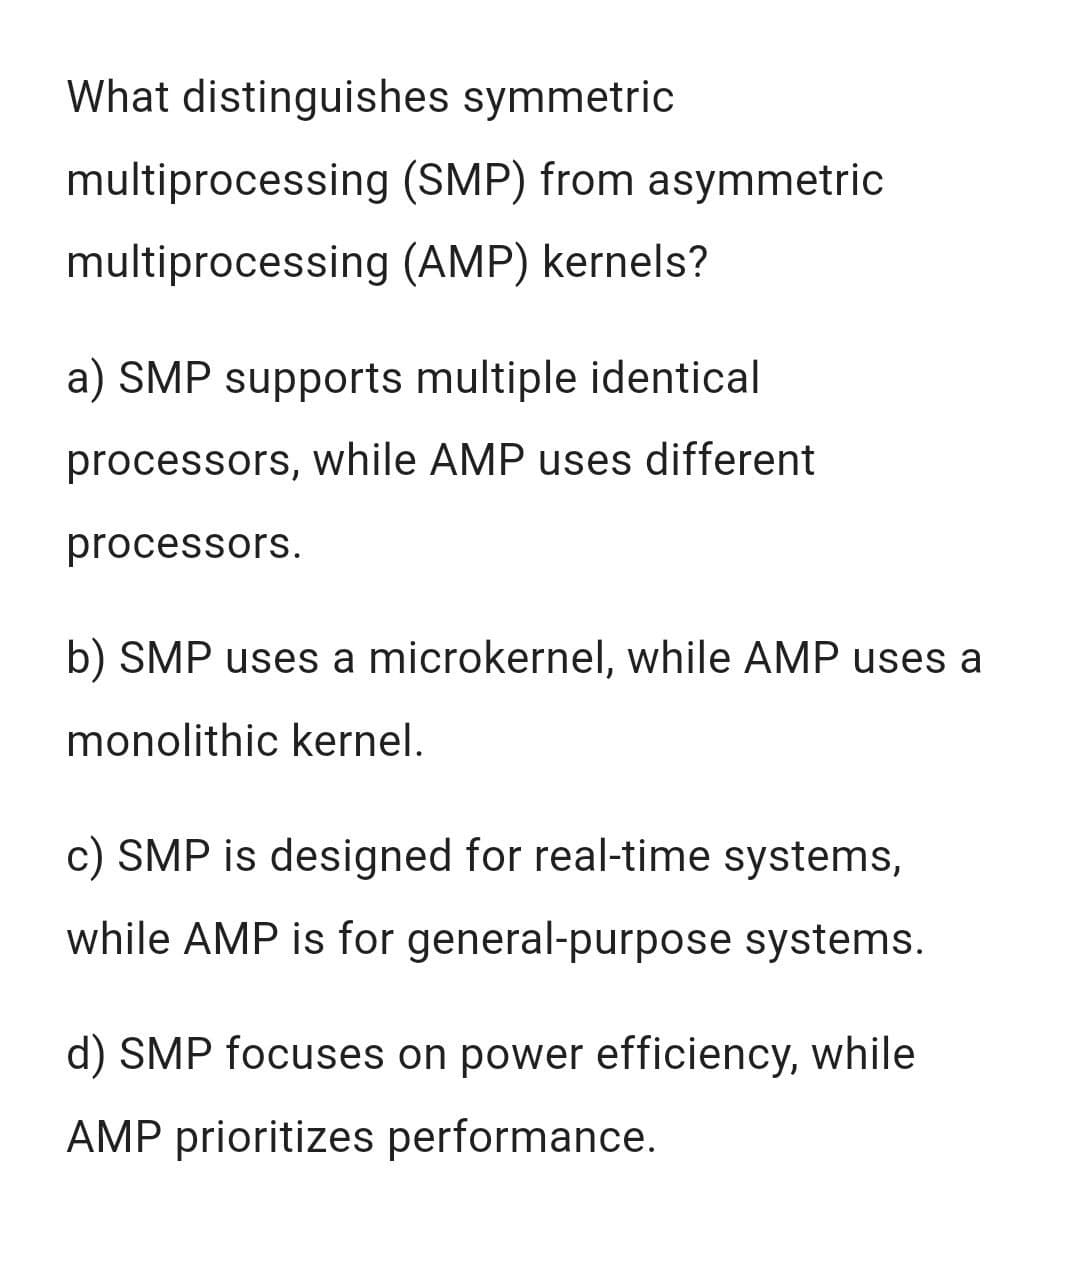 What distinguishes symmetric
multiprocessing (SMP) from asymmetric
multiprocessing (AMP) kernels?
a) SMP supports multiple identical
processors, while AMP uses different
processors.
b) SMP uses a microkernel, while AMP uses a
monolithic kernel.
c) SMP is designed for real-time systems,
while AMP is for general-purpose systems.
d) SMP focuses on power efficiency, while
AMP prioritizes performance.